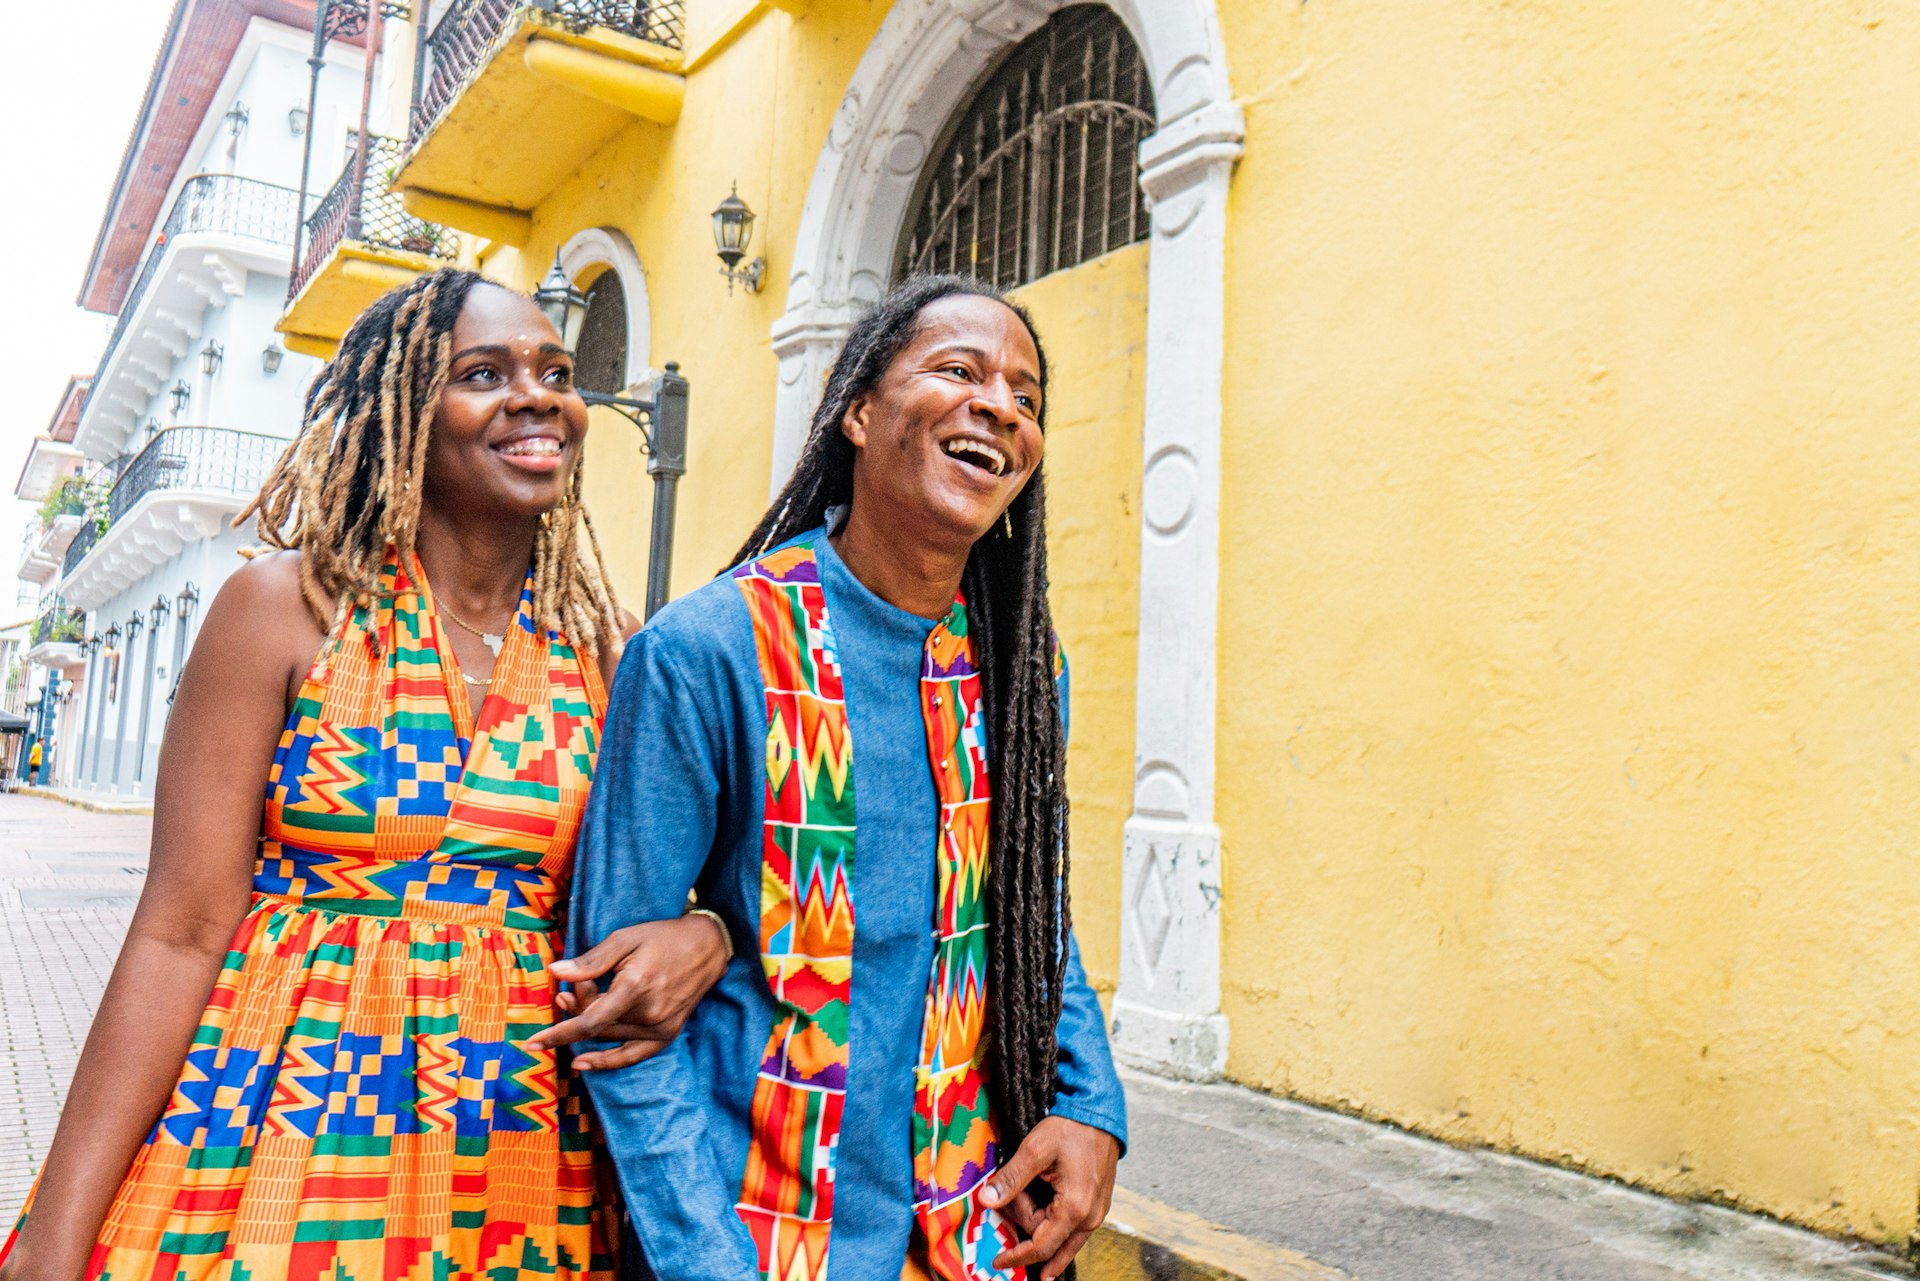 Two people wearing brightly colored clothing walk down a street smiling